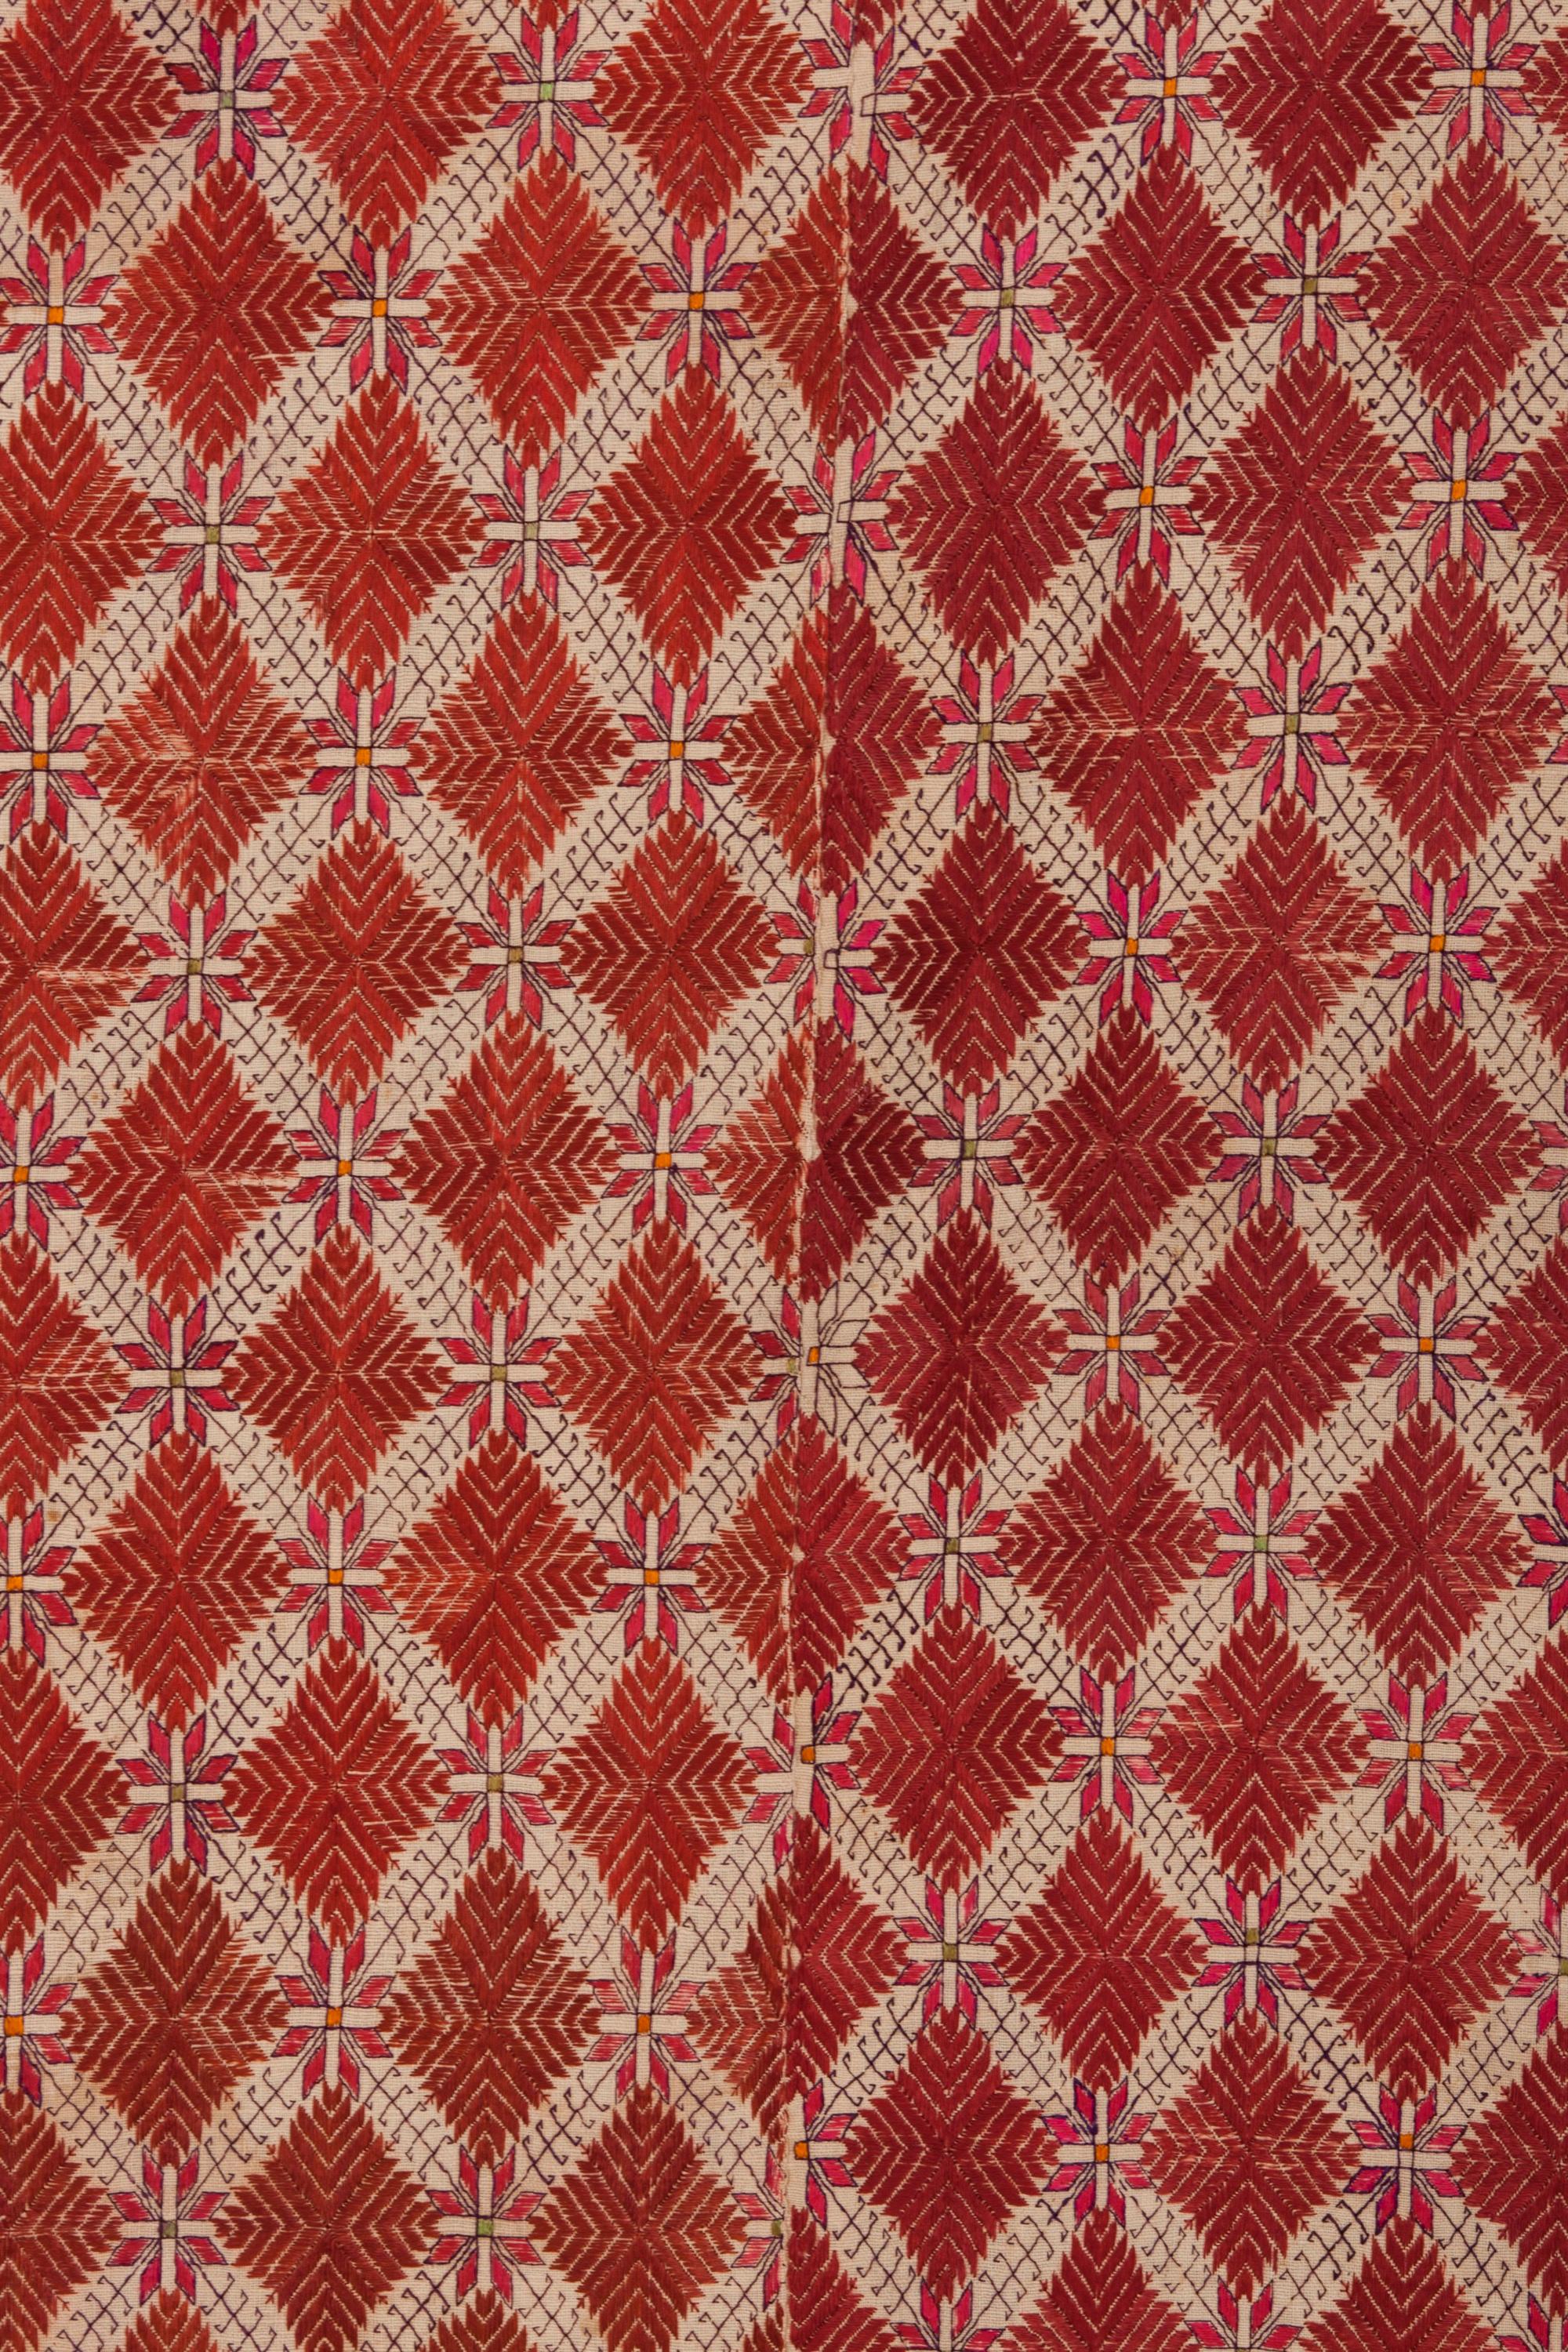 This elaborately embroidered Pakistani wallhanging was made using silk thread. Phulkari embroidery on handspun woven cotton (called khaddar). The piece is constructed in 3 sections joined on selvedges; left and right edges bound by embroidery. A